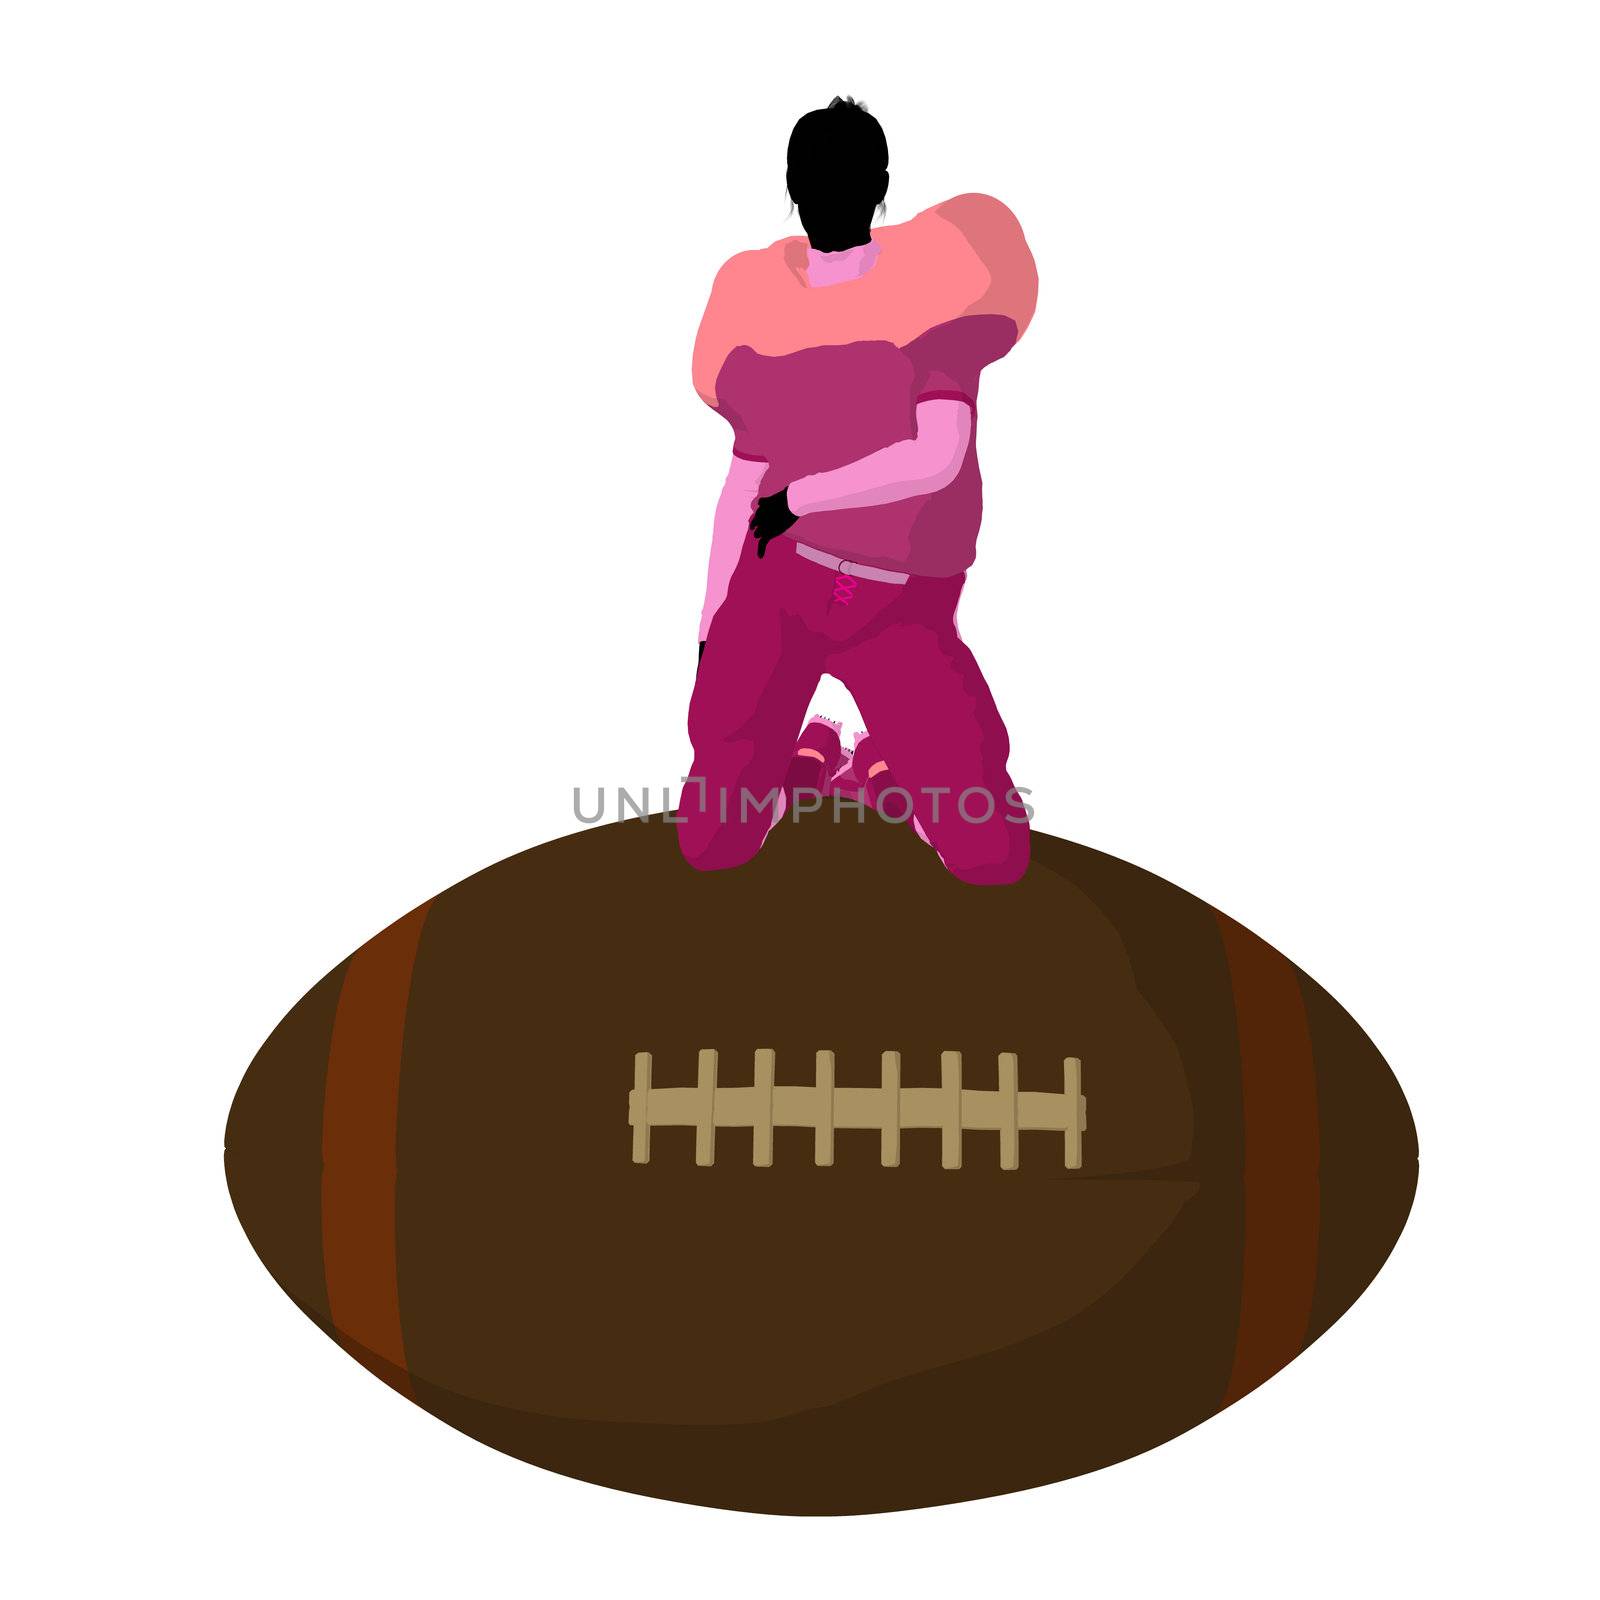 Female Football Player Illustration Silhouette by kathygold